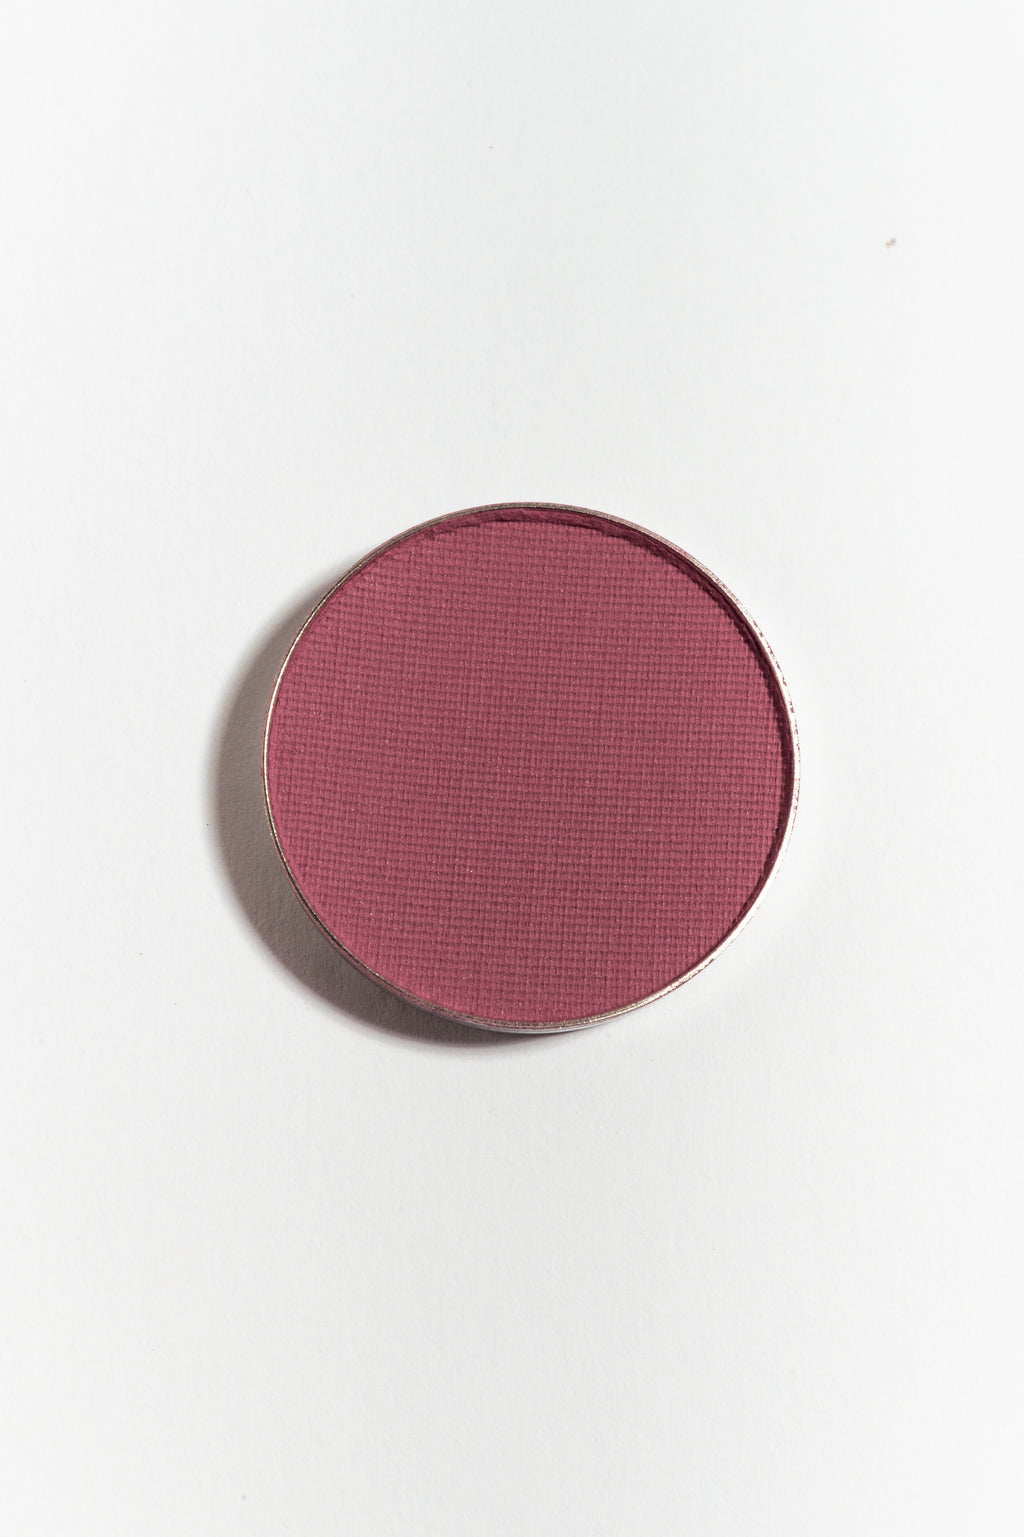 Eye shadow pan in Mulberry